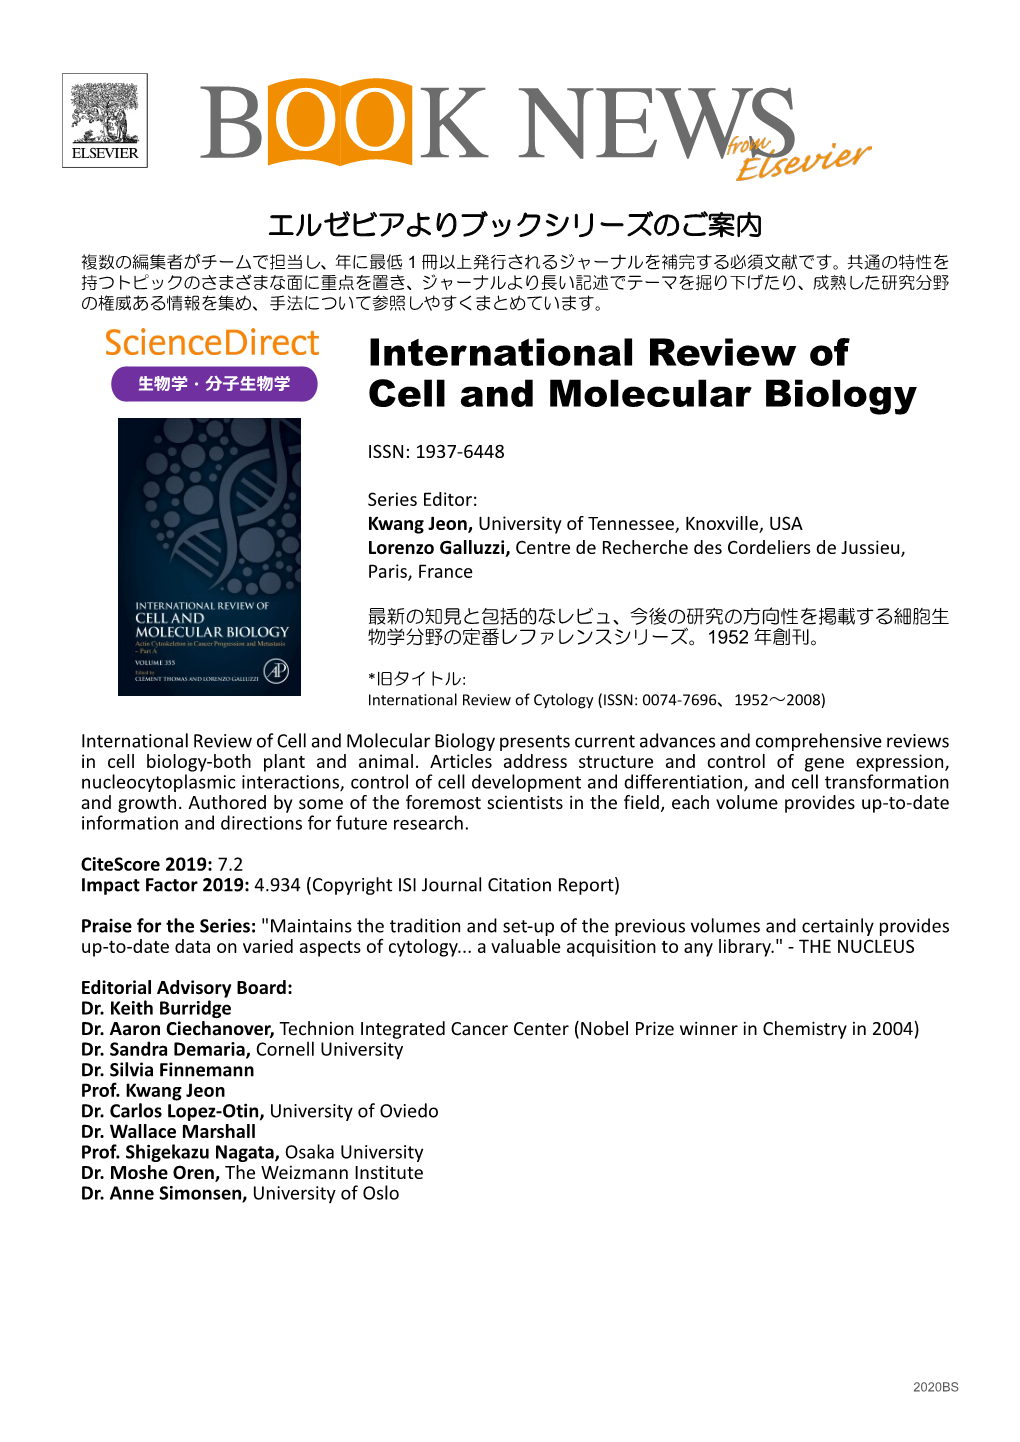 International Review of Cell and Molecular Biology Presents Current Advances and Comprehensive Reviews in Cell Biology-Both Plant and Animal